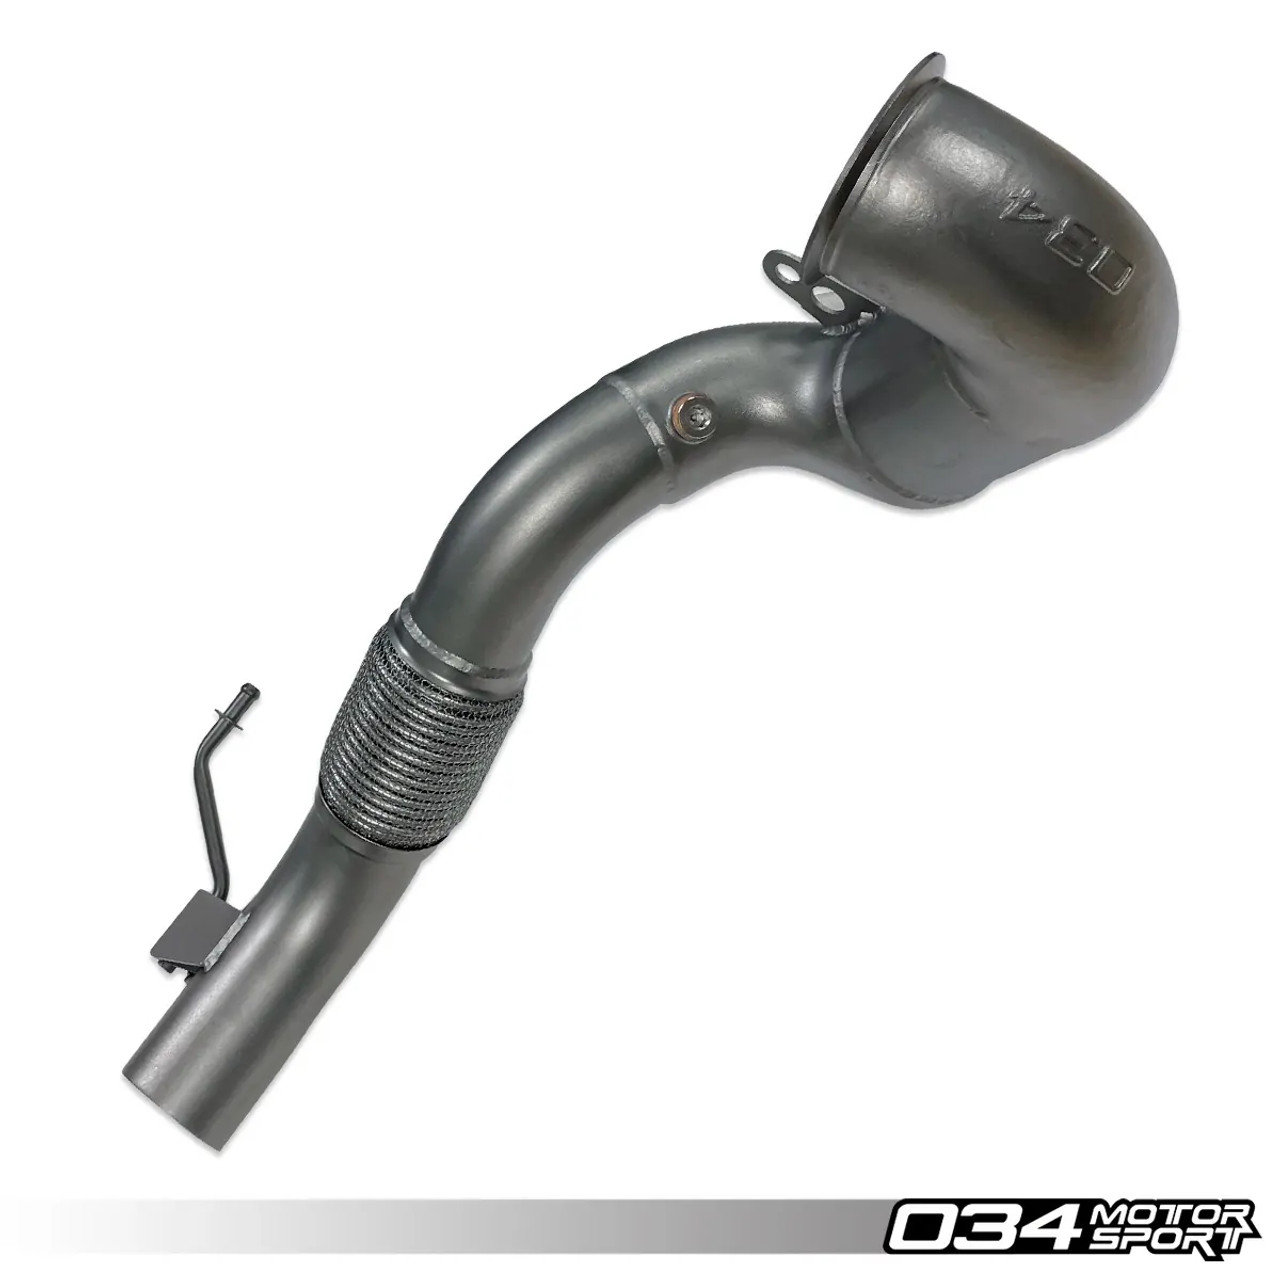 034Motorsport Cast Stainless Steel Racing Downpipe for MK7 & 8V AWD